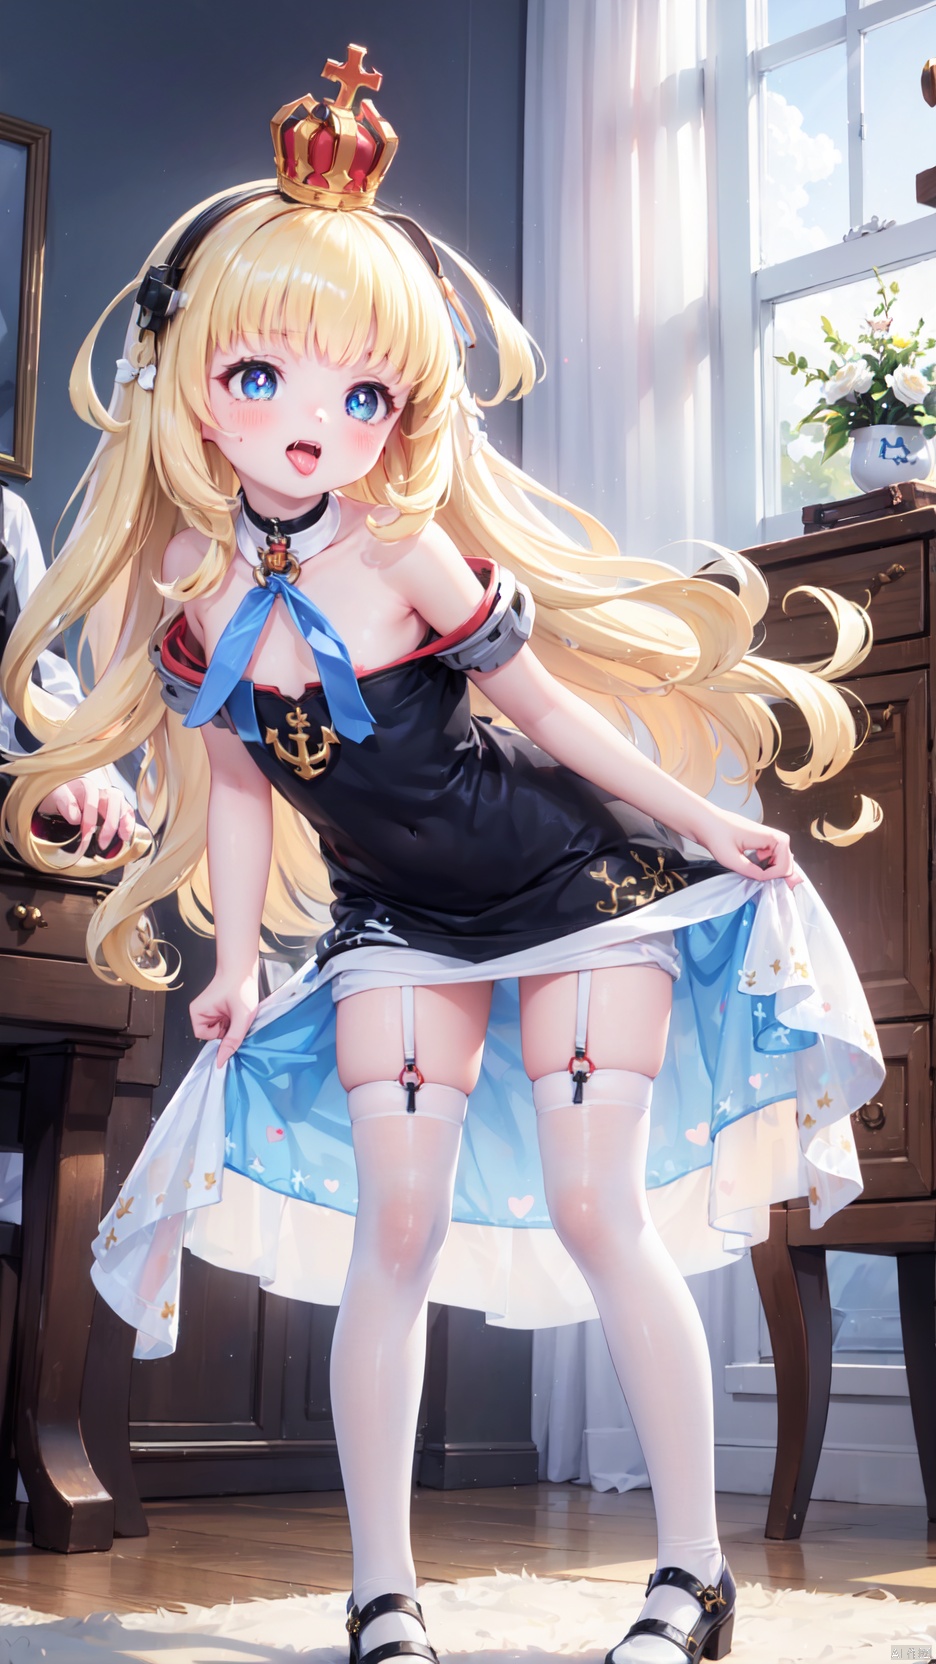 from below,queen elizabeth (azur lane),Little girl(1.5),aged down,beautiful detailed girl,narrow waist,Delicate cute face,princess crown,small crown,anchor choker,(anchor print naval uniform),blue princess dress,bare shoulders,ornate clothes,fine fabric emphasis,blue eyes,beautiful detailed eyes,Glowing eyes,((heart-shaped pupils)),((blonde hair)),((hair spread out,wavy hair)),very long shoulder,glowing hair,Extremely delicate hair,Thin leg,white legwear garter,black footwear,Slender fingers,steepled fingers,shiny nails,((clothes pull,**********)),ahegao(expression),smile,open mouth,tongue out,licking lips,drooling,heavy breathing,fangs out,big fangs,puffy cheeks,beautiful detailed mouth,looking down at viewer,anchor (ornament),warship,harbor,royal navy (emblem),royal navy flag,hyper realistic,magic,4k,incredible quality,best quality,masterpiece,highly detailed,extremely detailed CG,cinematic lighting,light particle,backlighting,full body,high definition,detail enhancement,(perfect hands, perfect anatomy),8k_wallpaper,extreme details,colorful